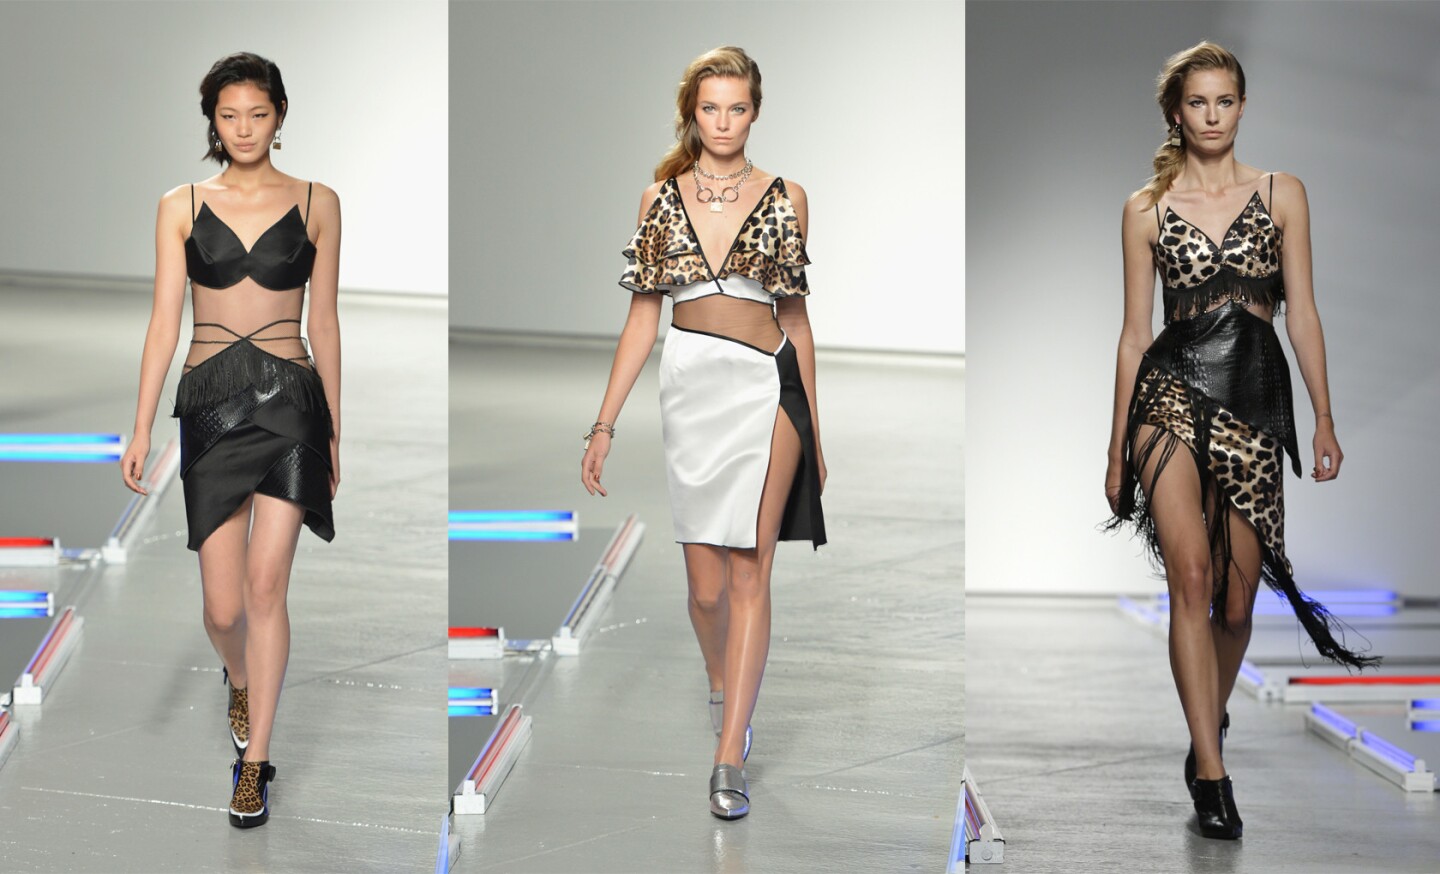 Rodarte showed styles of Los Angeles seedy street culture and blared "Welcome to the Jungle" to set the '80s/'90s vibe.